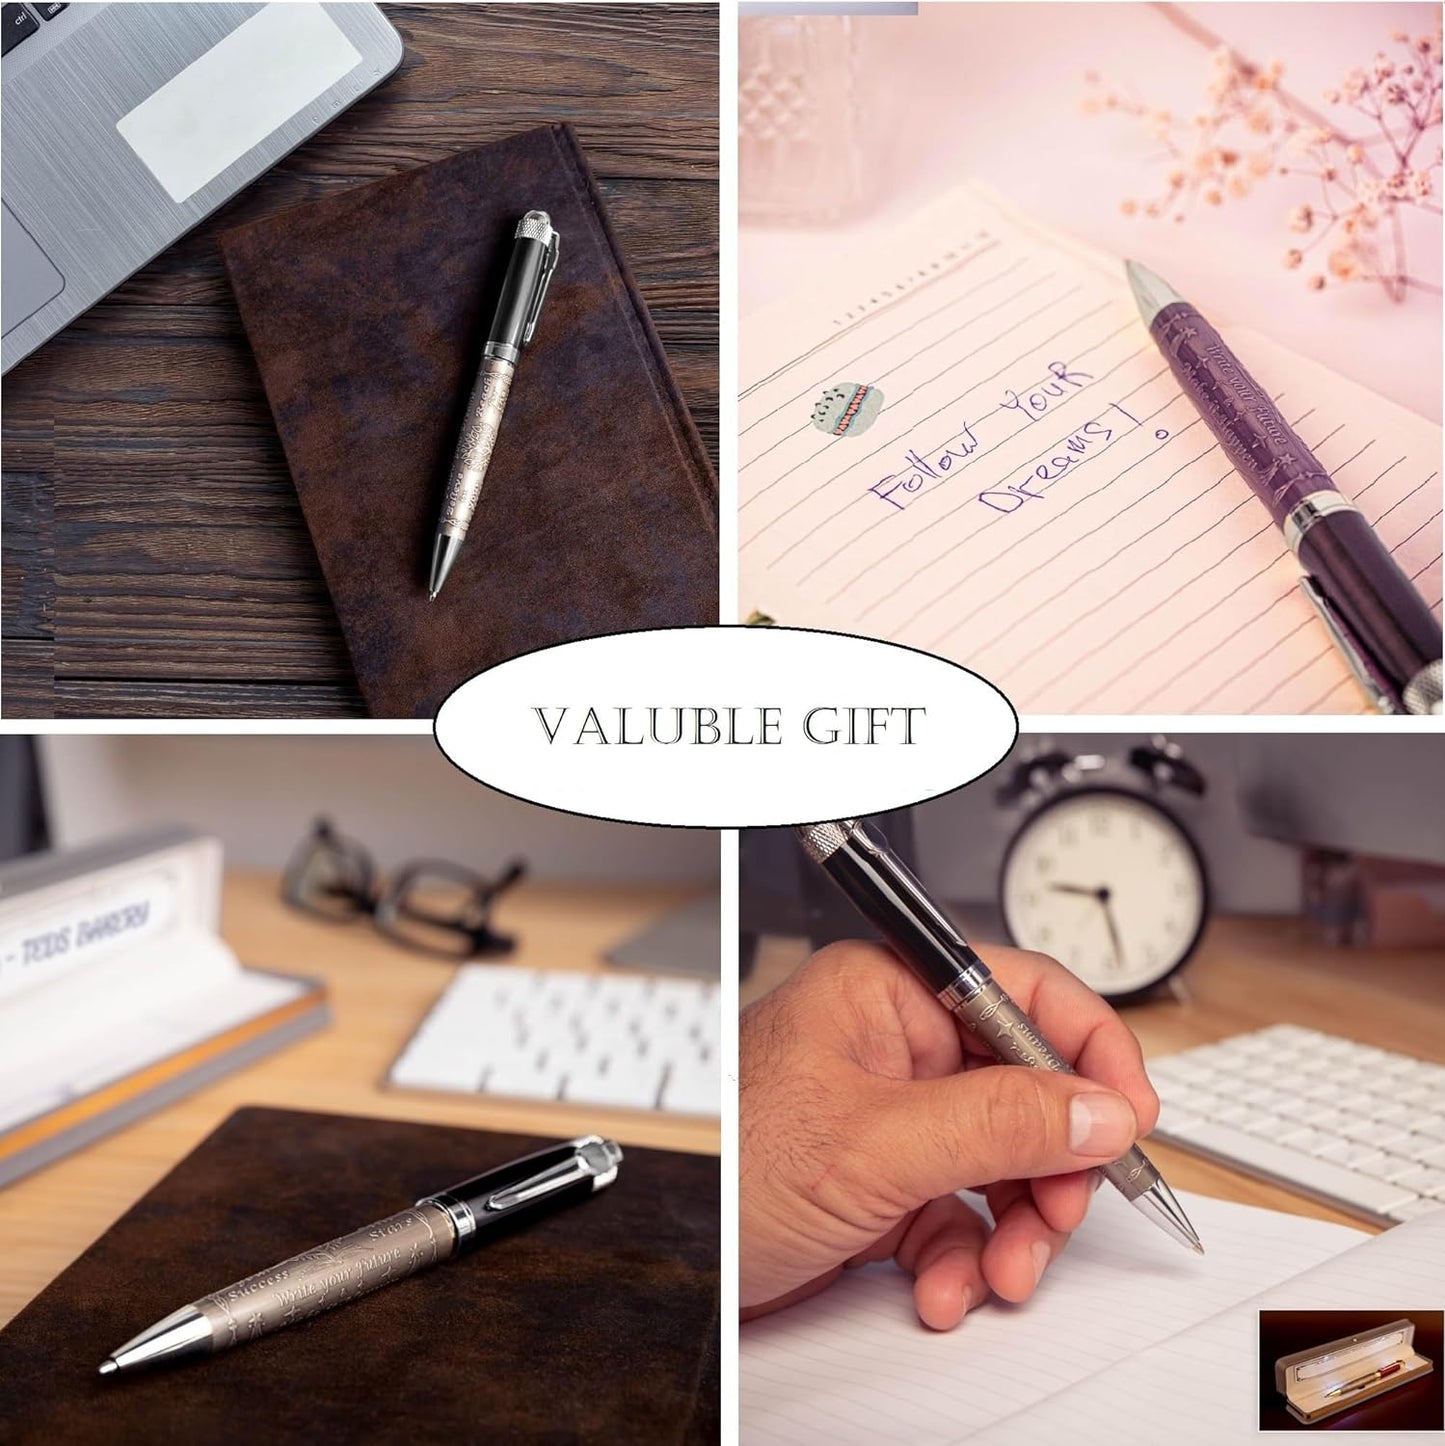 Luxury Ball Point Pen with Gift Box - The Perfect Elegance Gift (Silver Black & Red Gold)